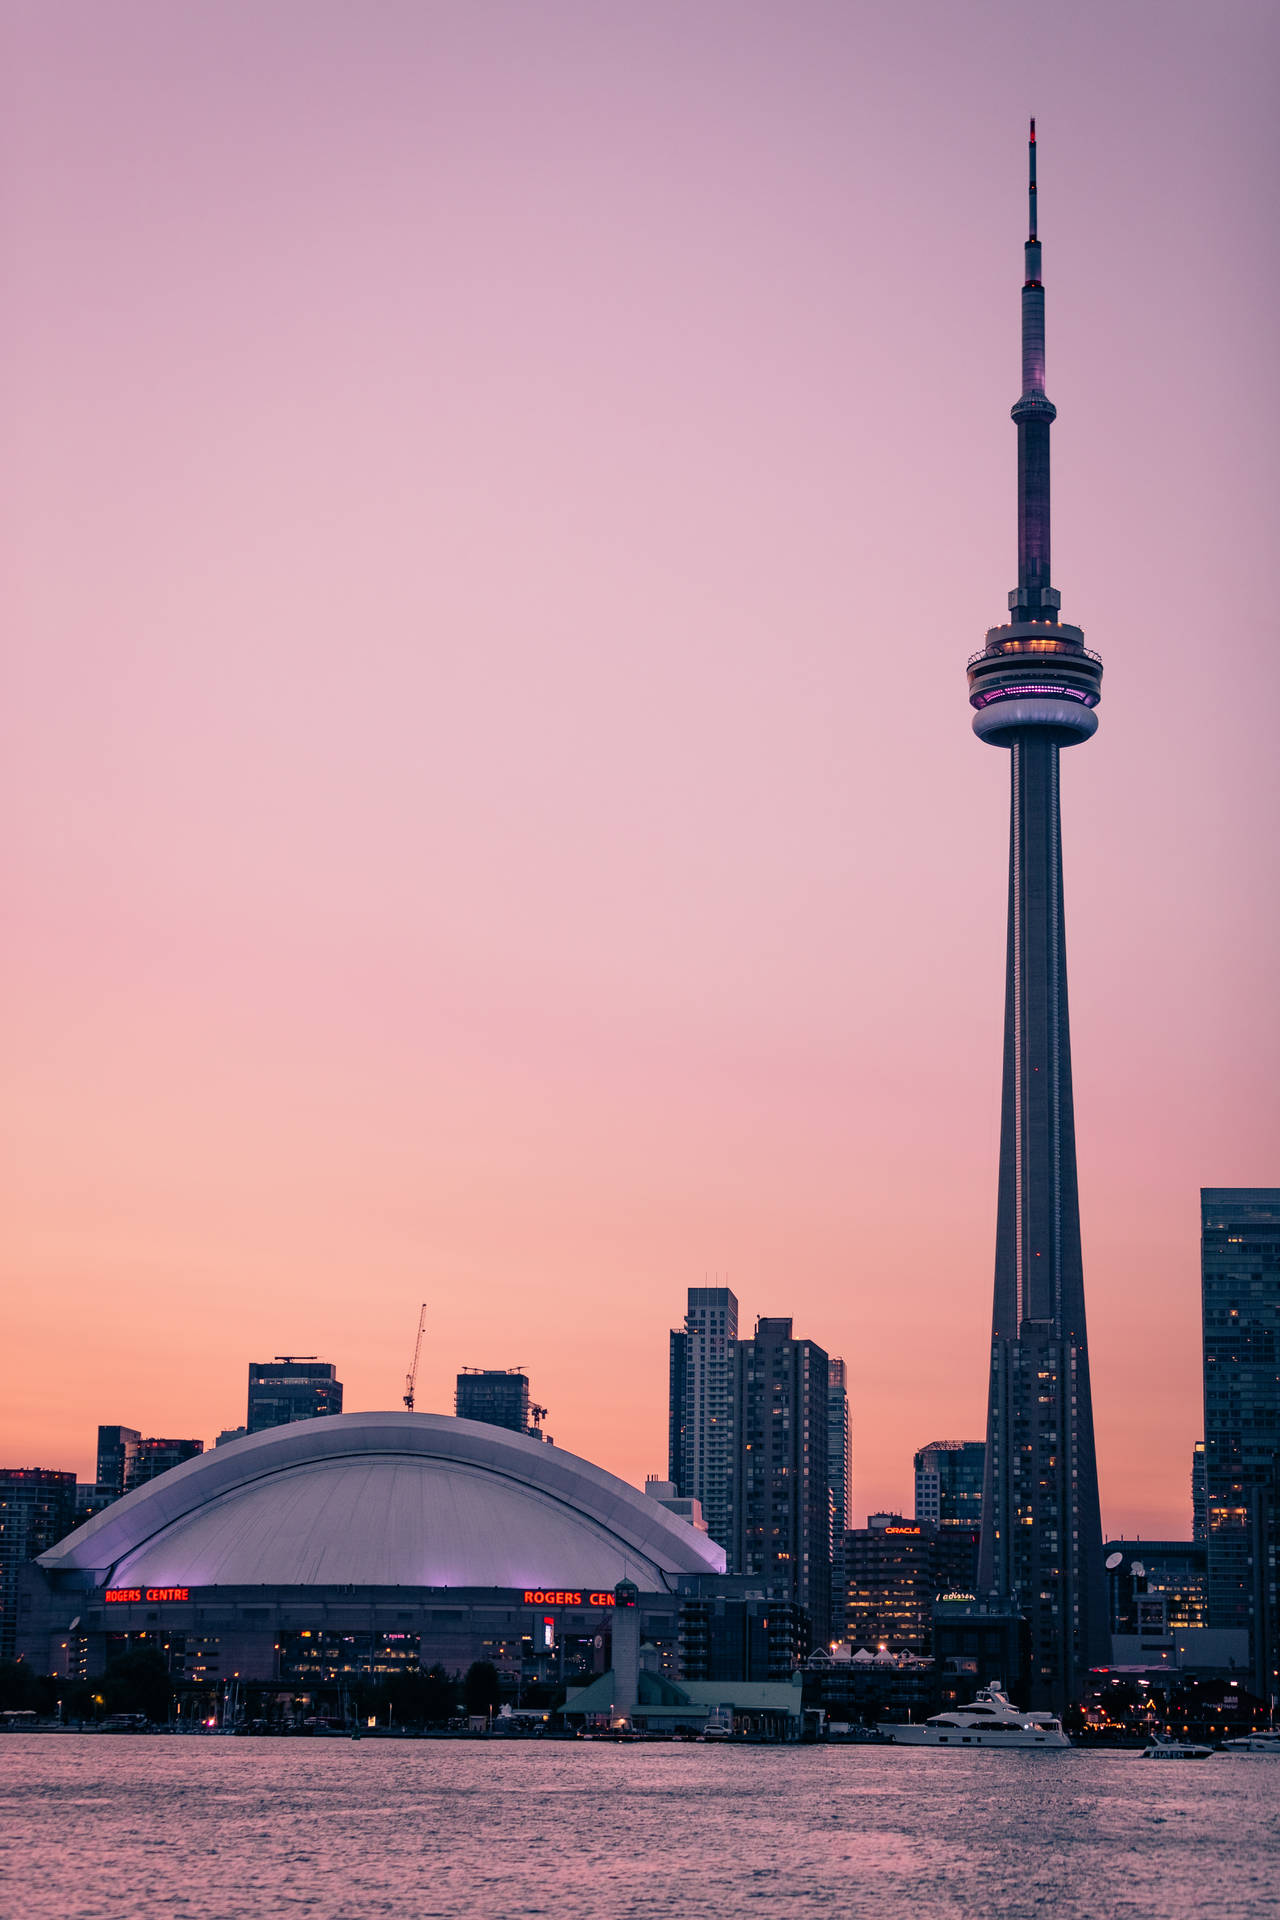 1K Cn Tower Toronto Canada Pictures  Download Free Images on Unsplash